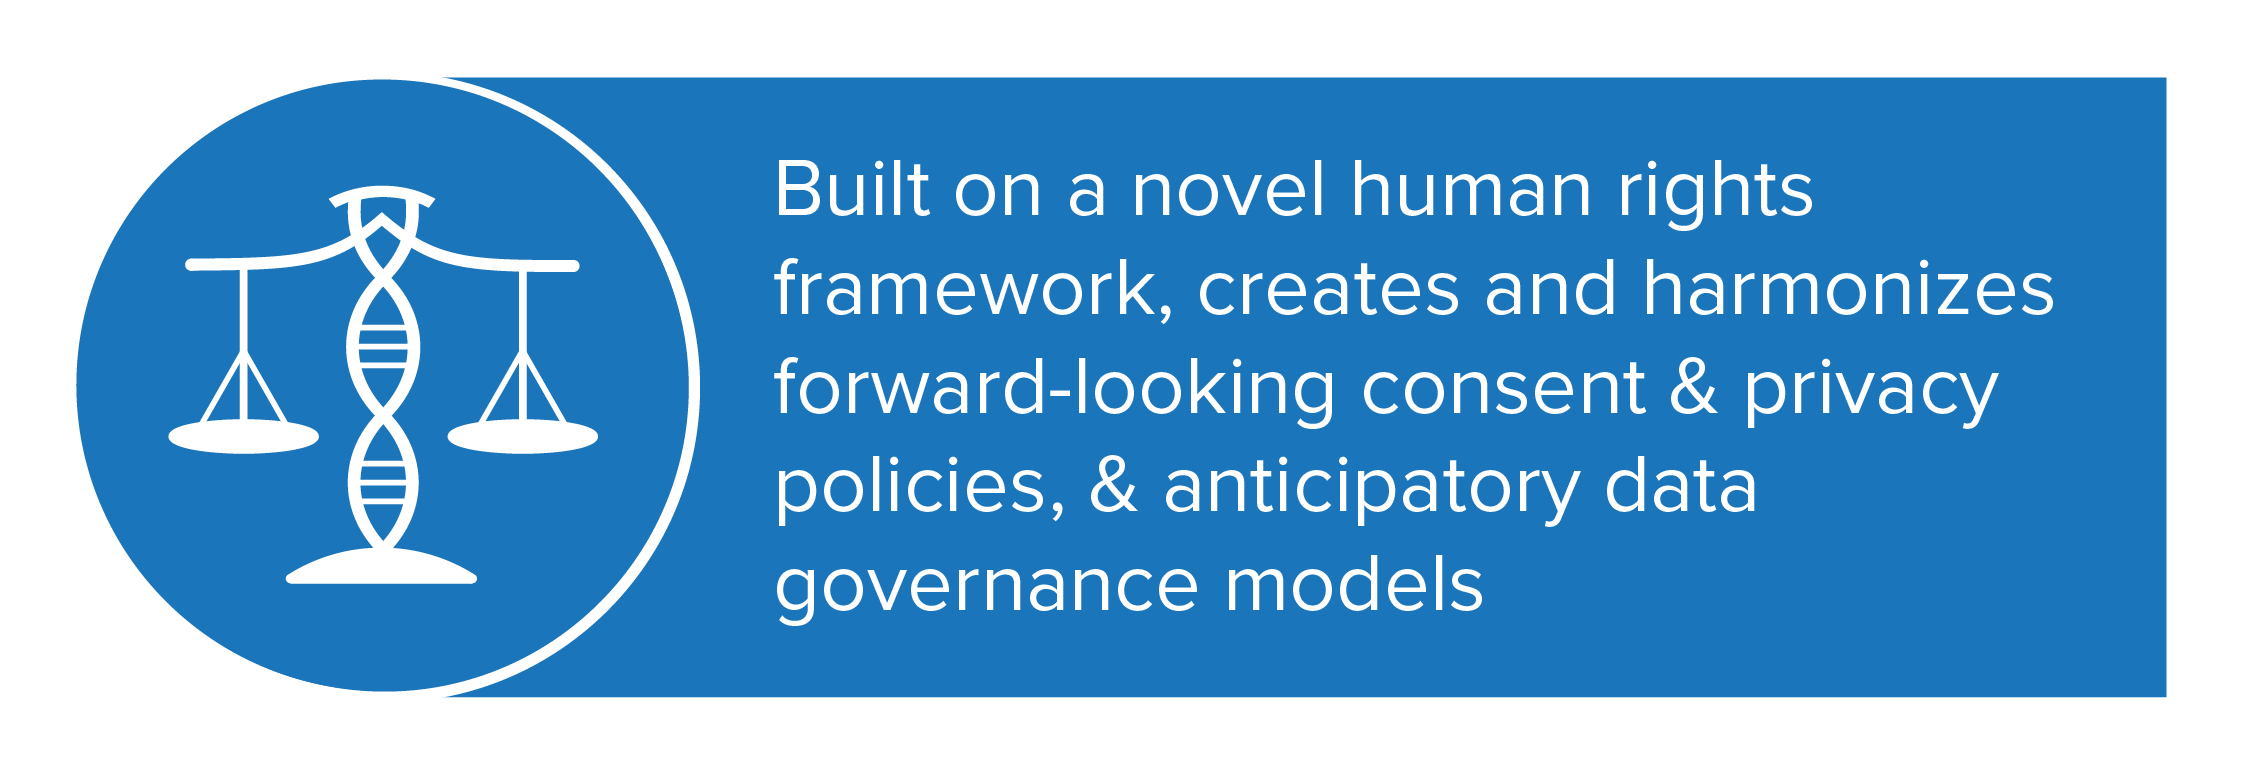 Built on a novel human rights framework, REWS creates and harmonises forward-looking consent and privacy policies, and anticipatory data governance models.